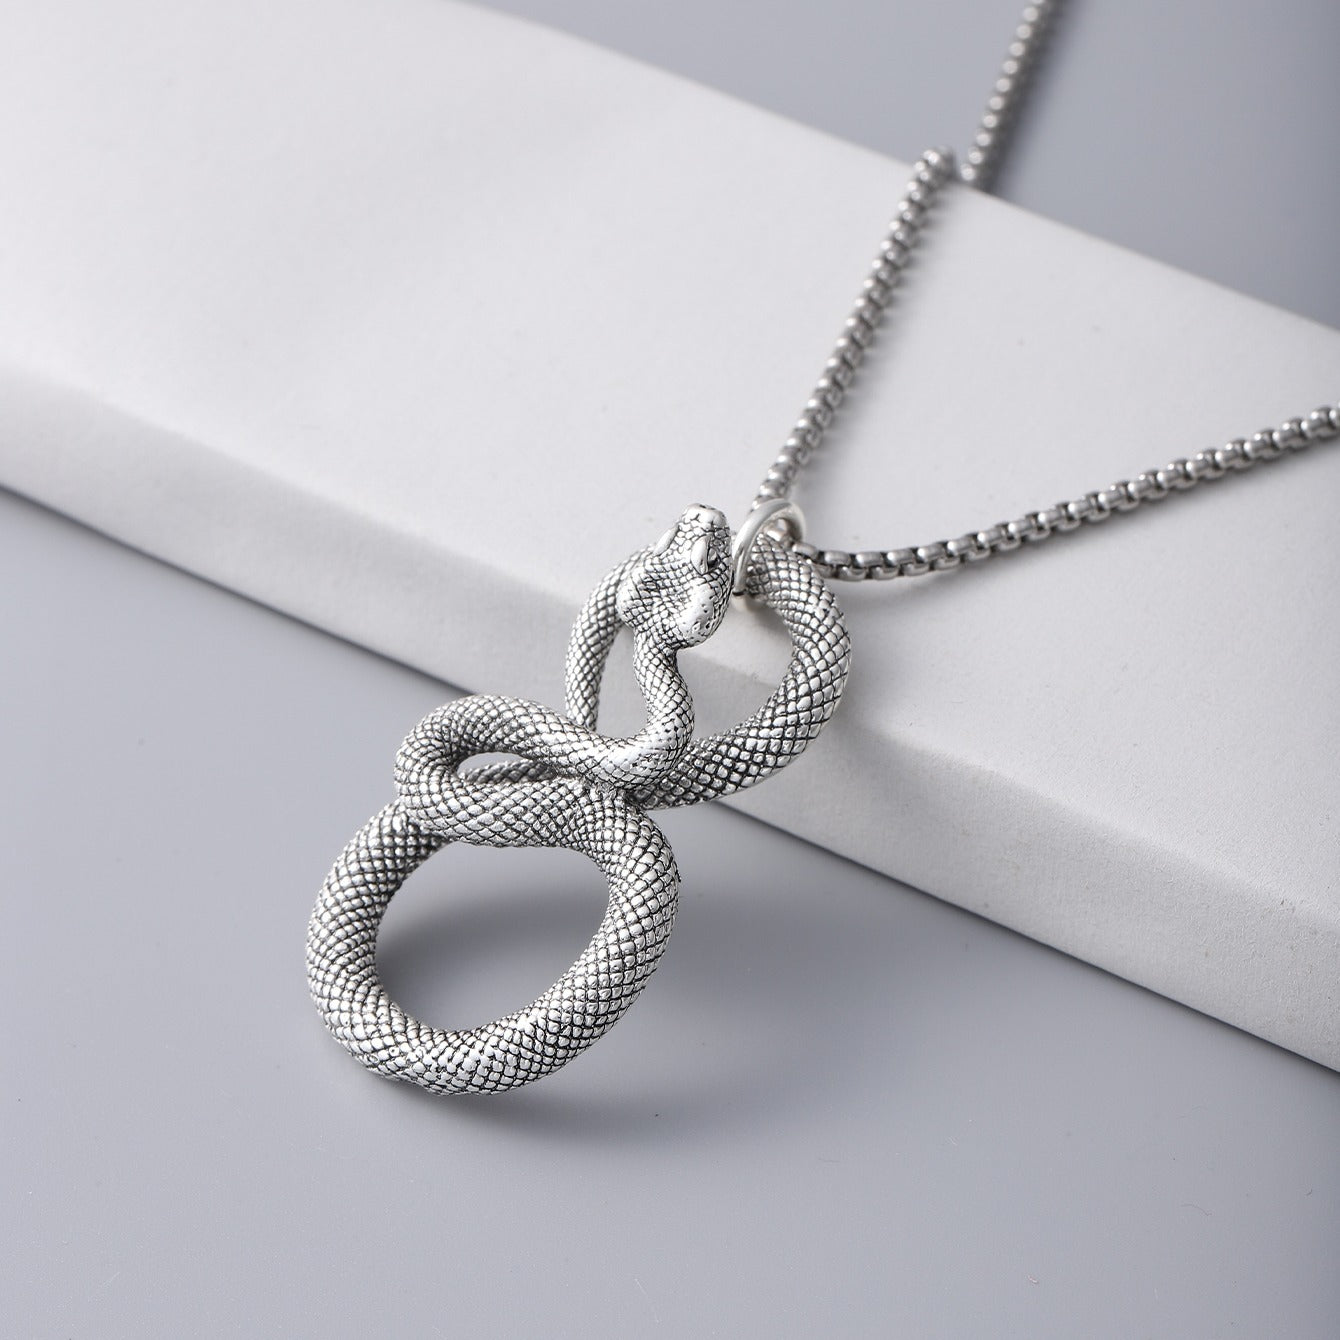 Men's Stainless Steel Classic Snake Pendant Necklace